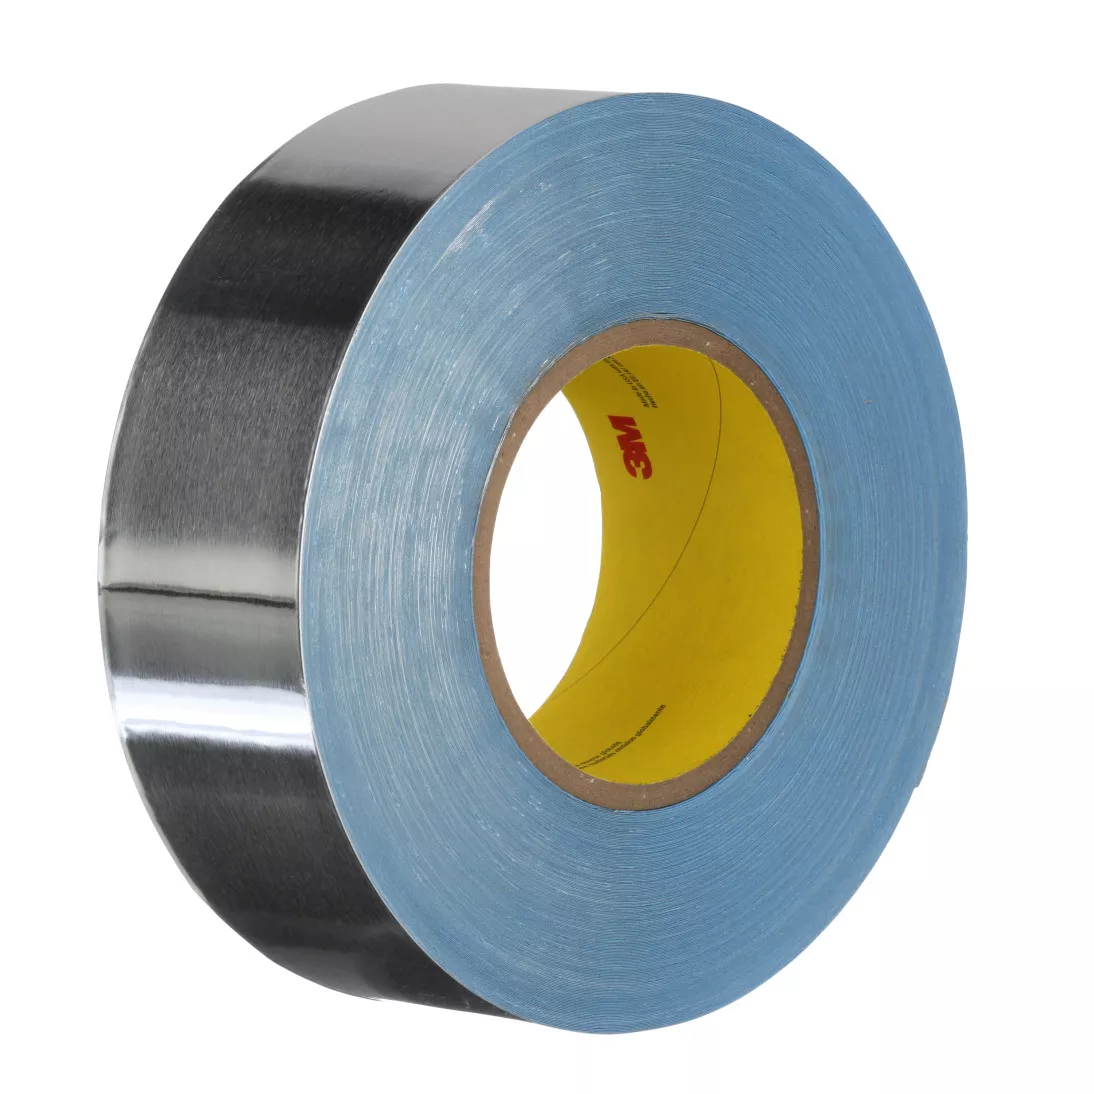 3M™ Vibration Damping Tape 434, Silver, 8 in x 60 yd, 7.5 mil, 1 roll
per case